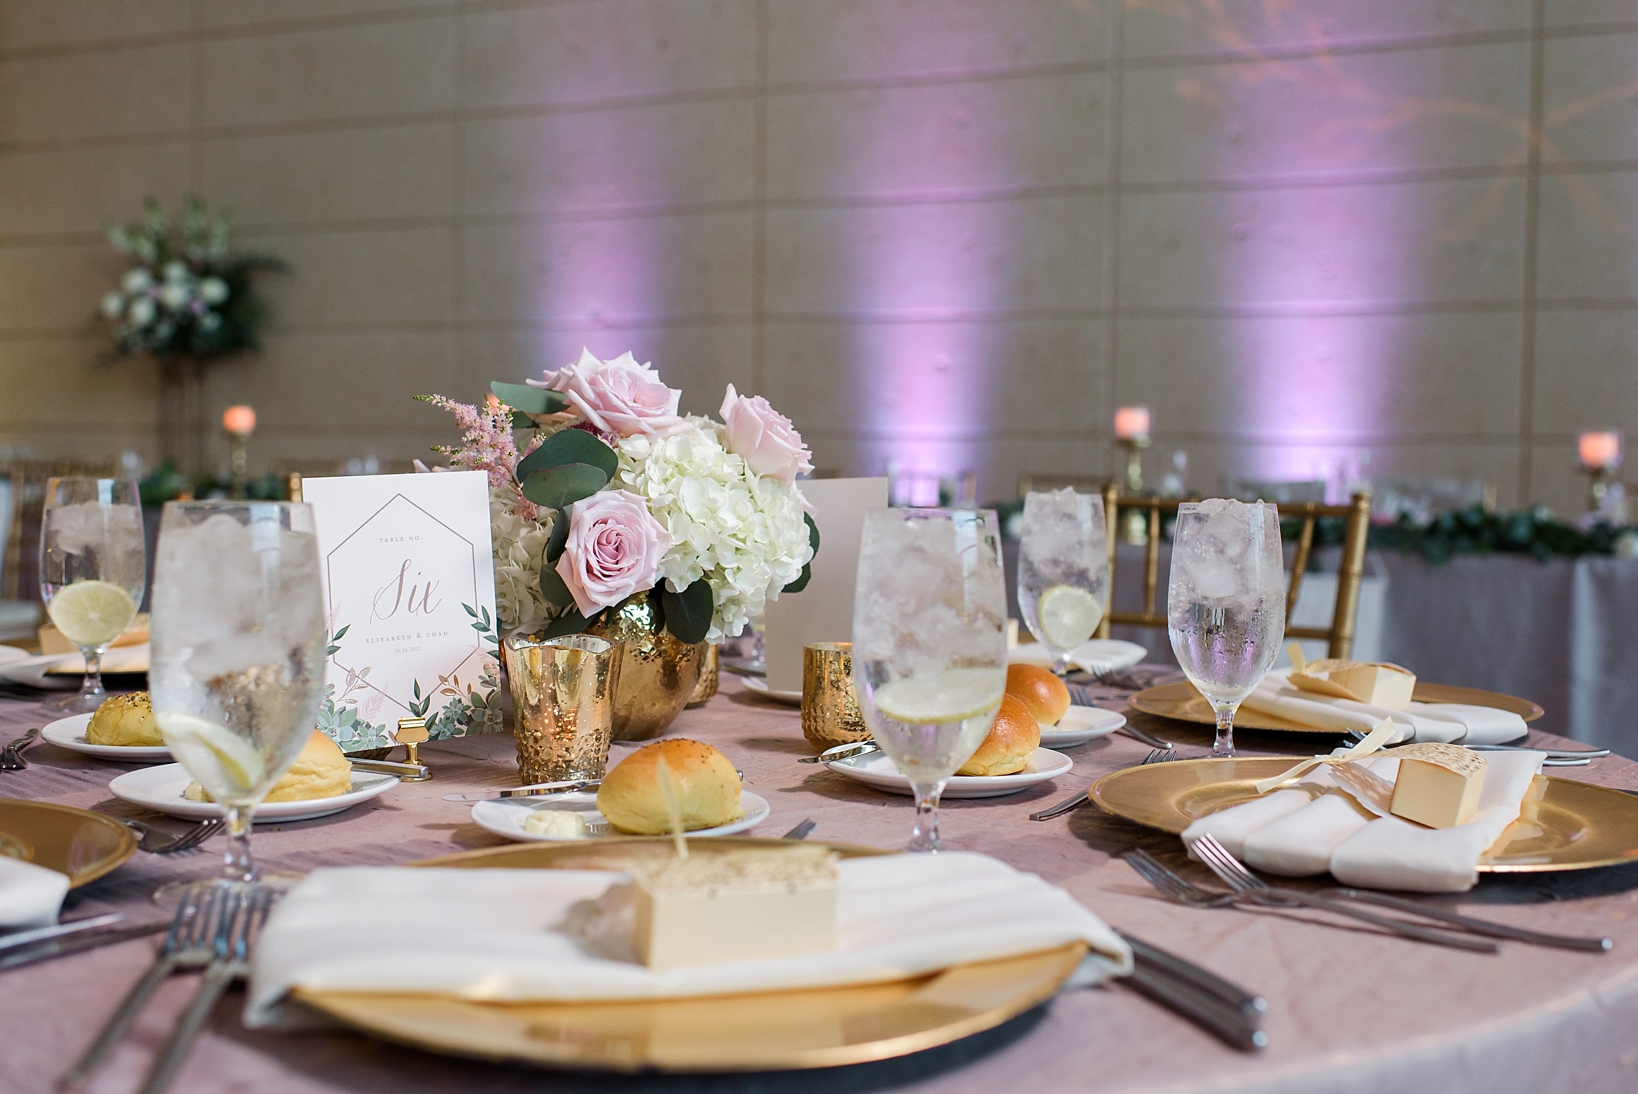 Wedding Reception details with purple uplighting and gold accents